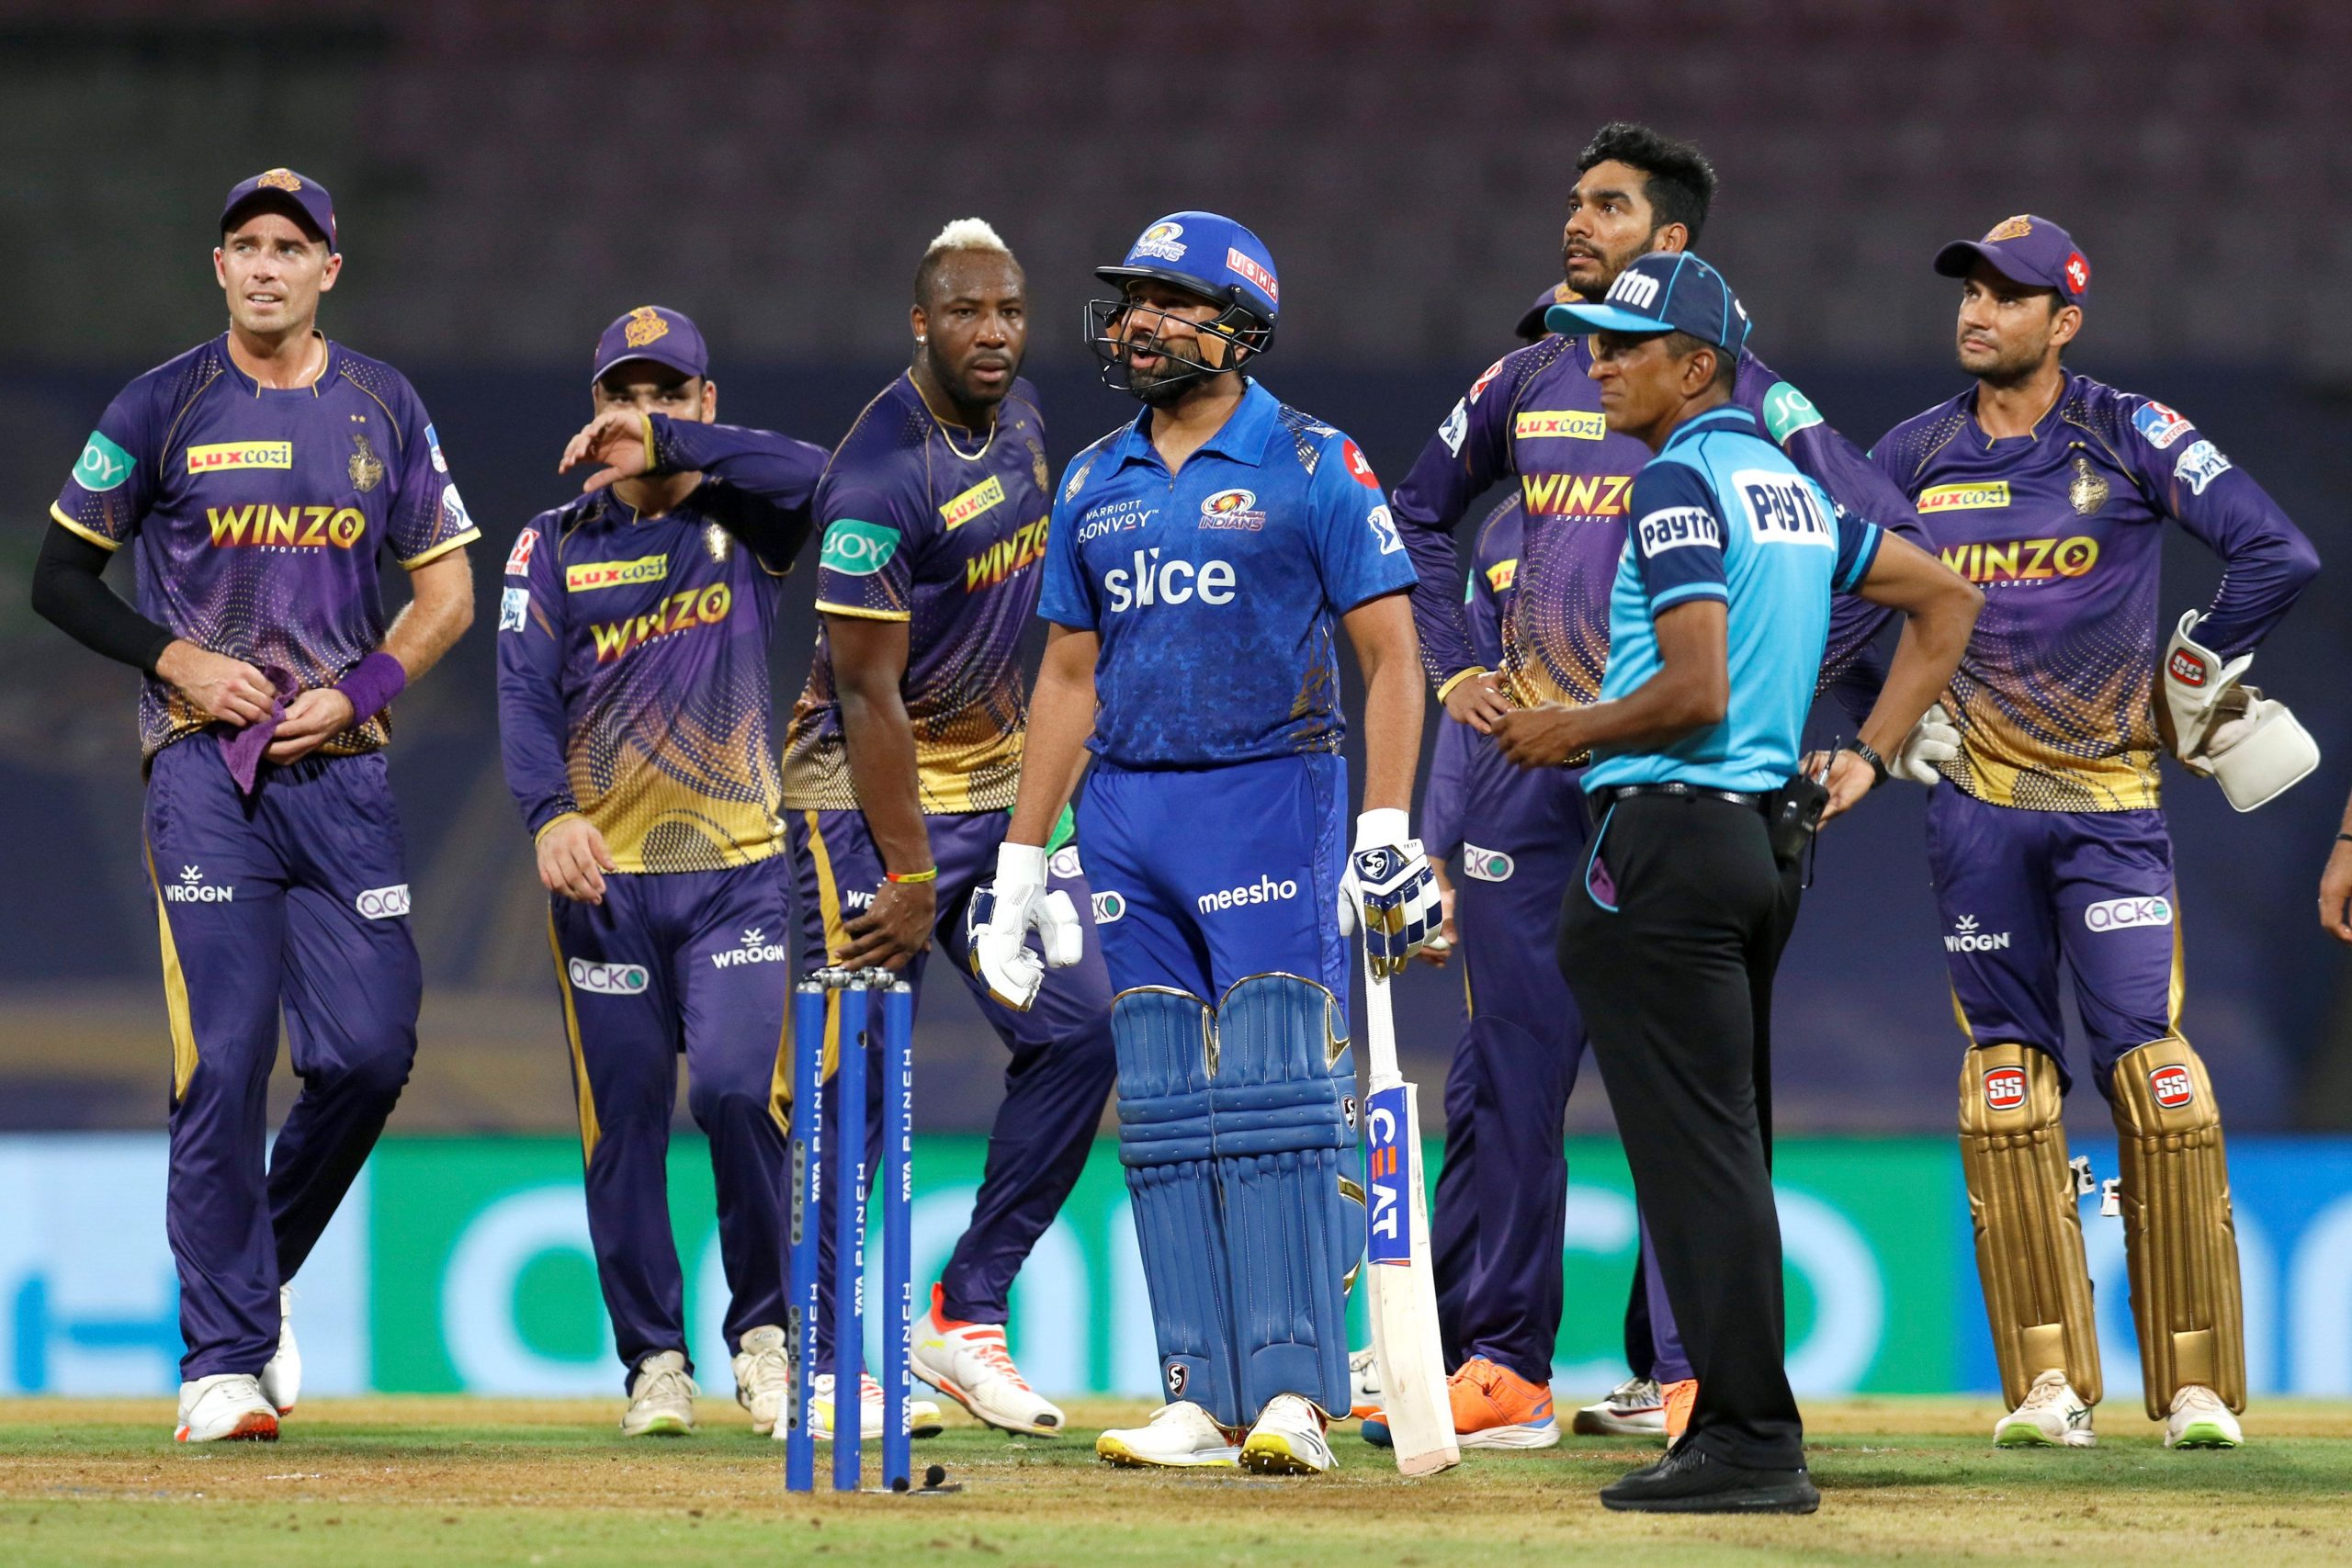 Mumbai Indians skipper Rohit Sharma is one ‘minor adjustment’ away from finding form again